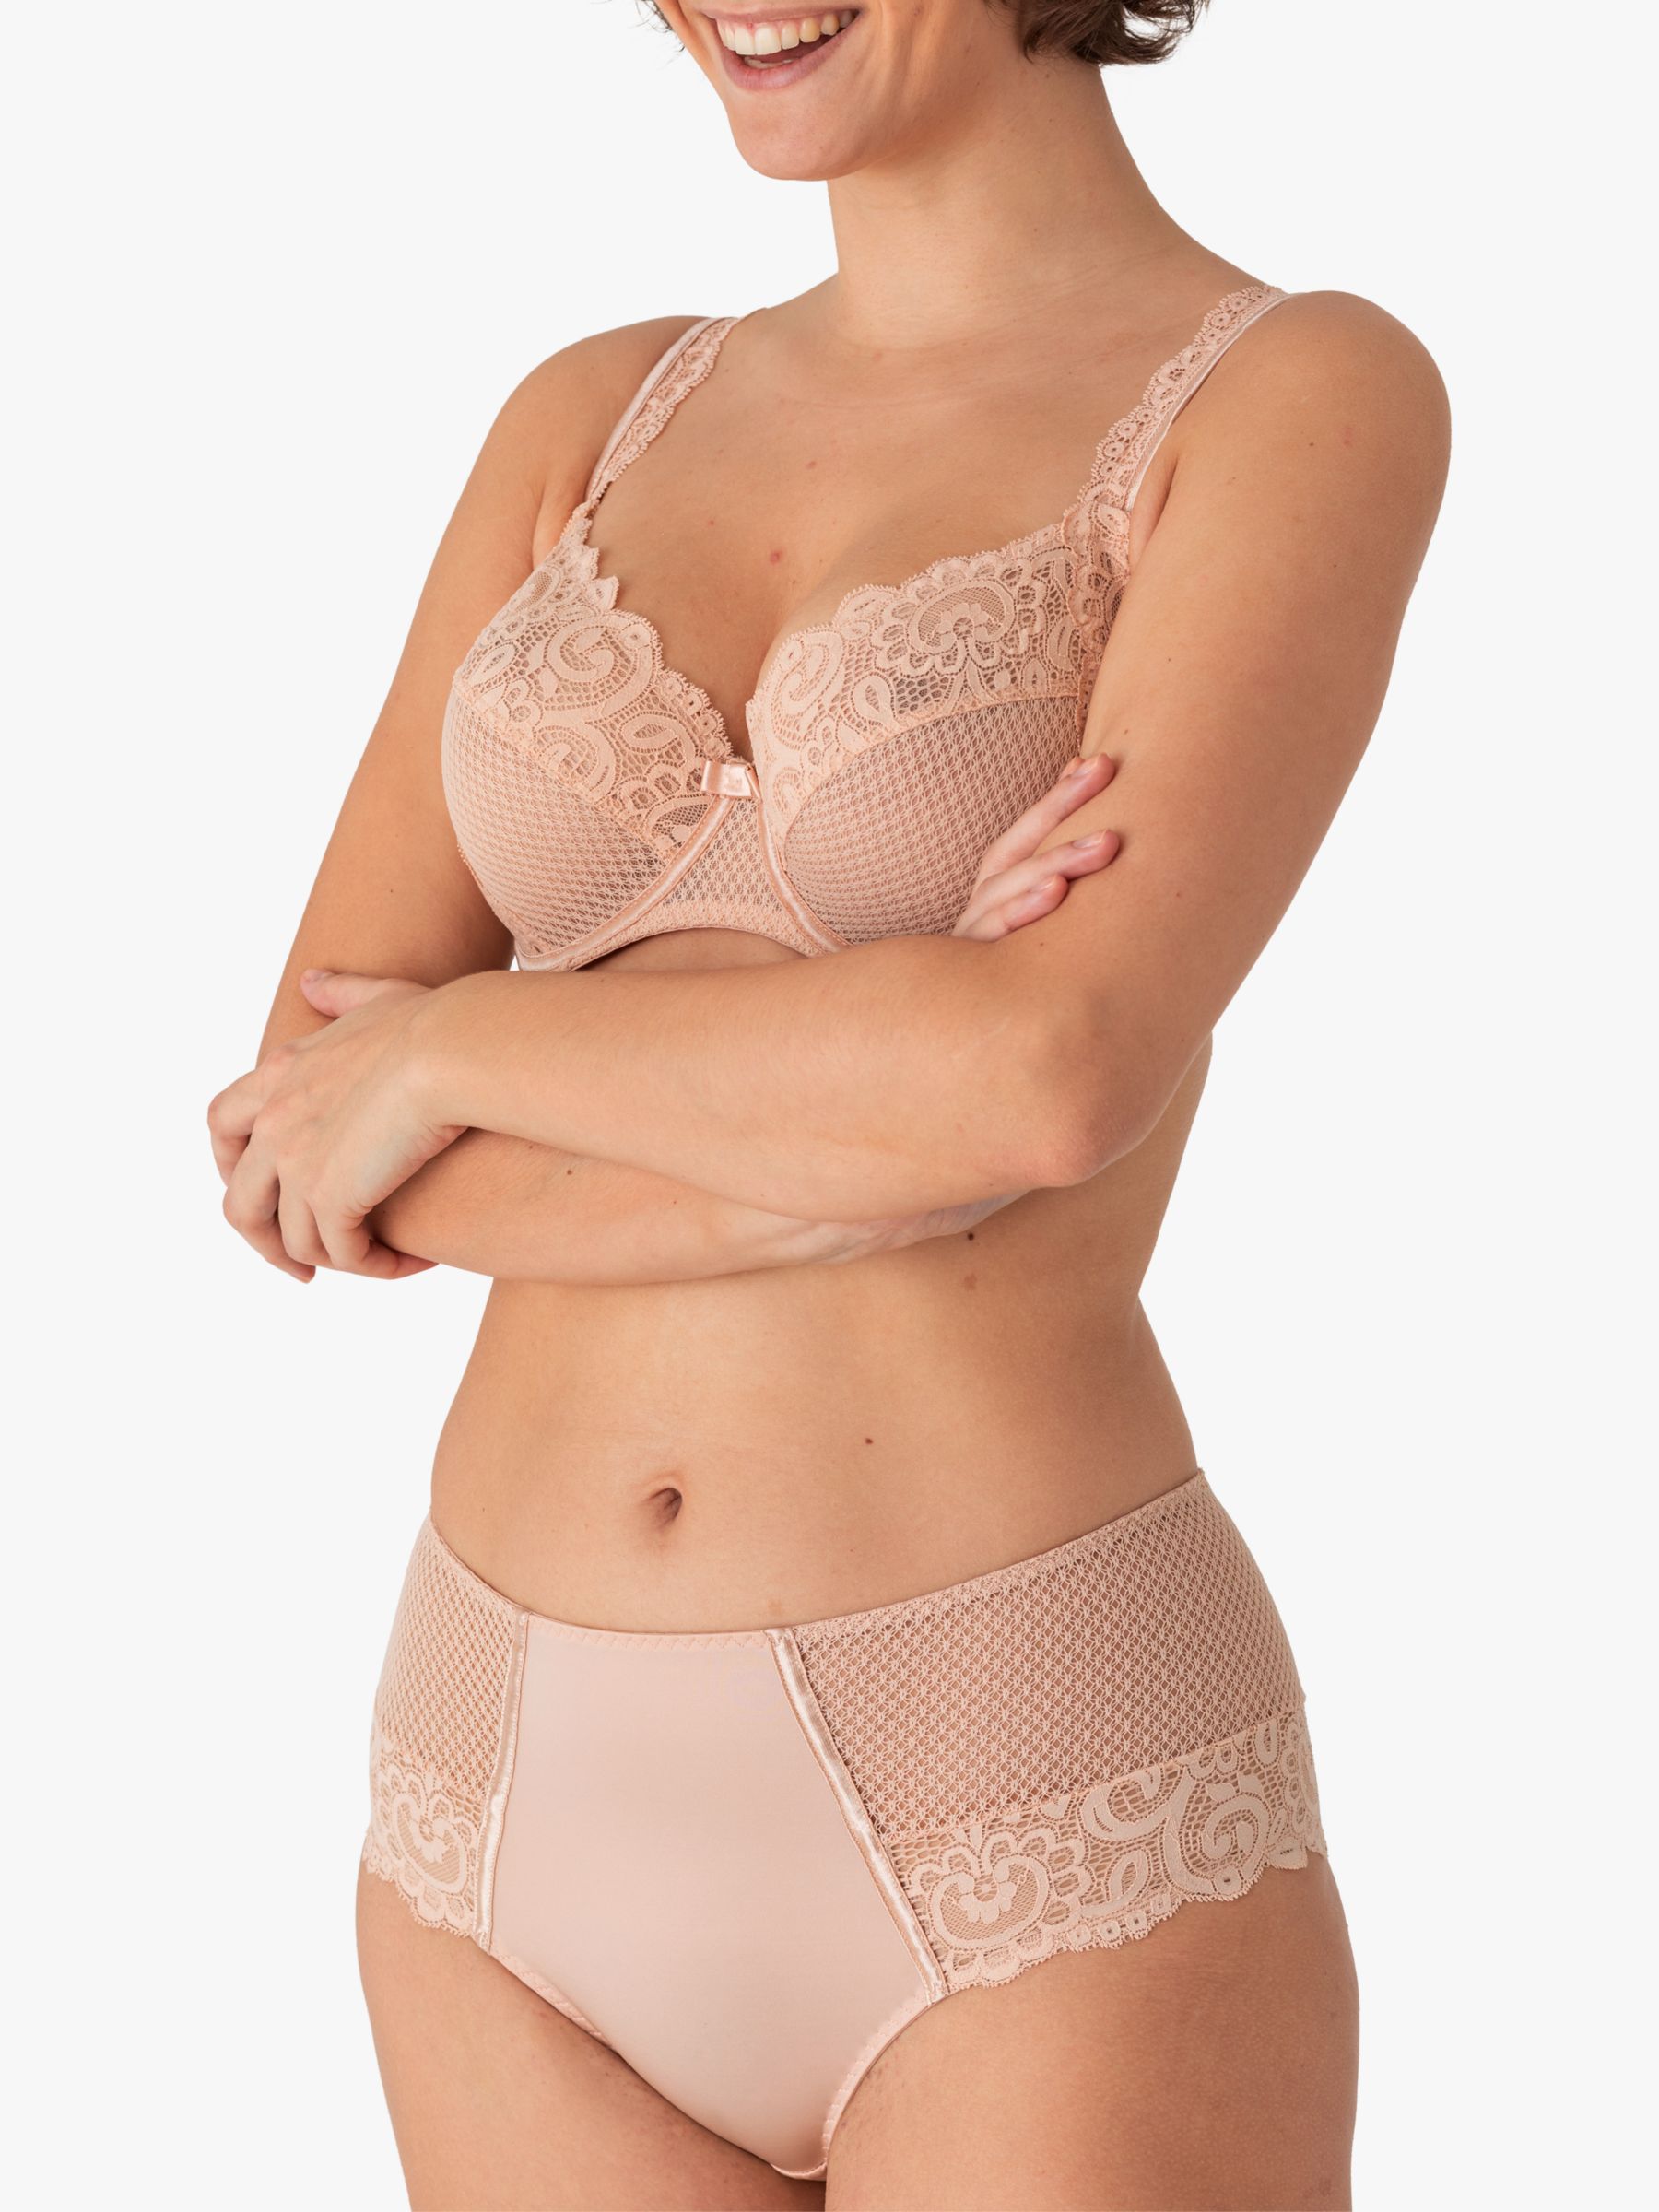 Maison Lejaby Gaby Lace Full Cup Underwired Bra, Rose at John